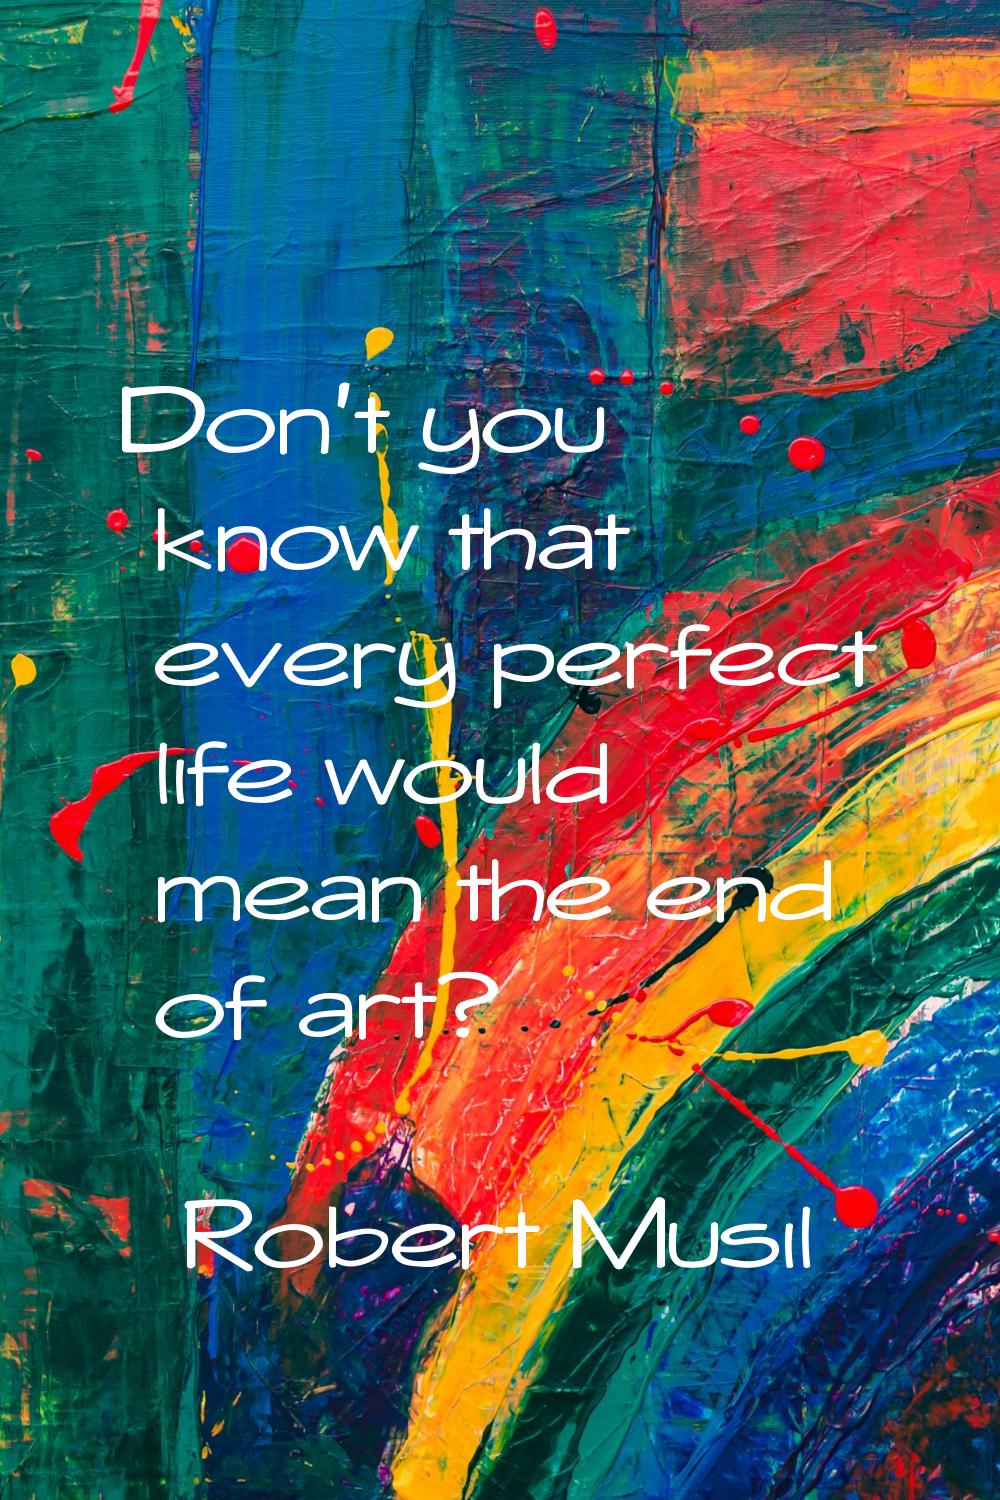 Don't you know that every perfect life would mean the end of art?